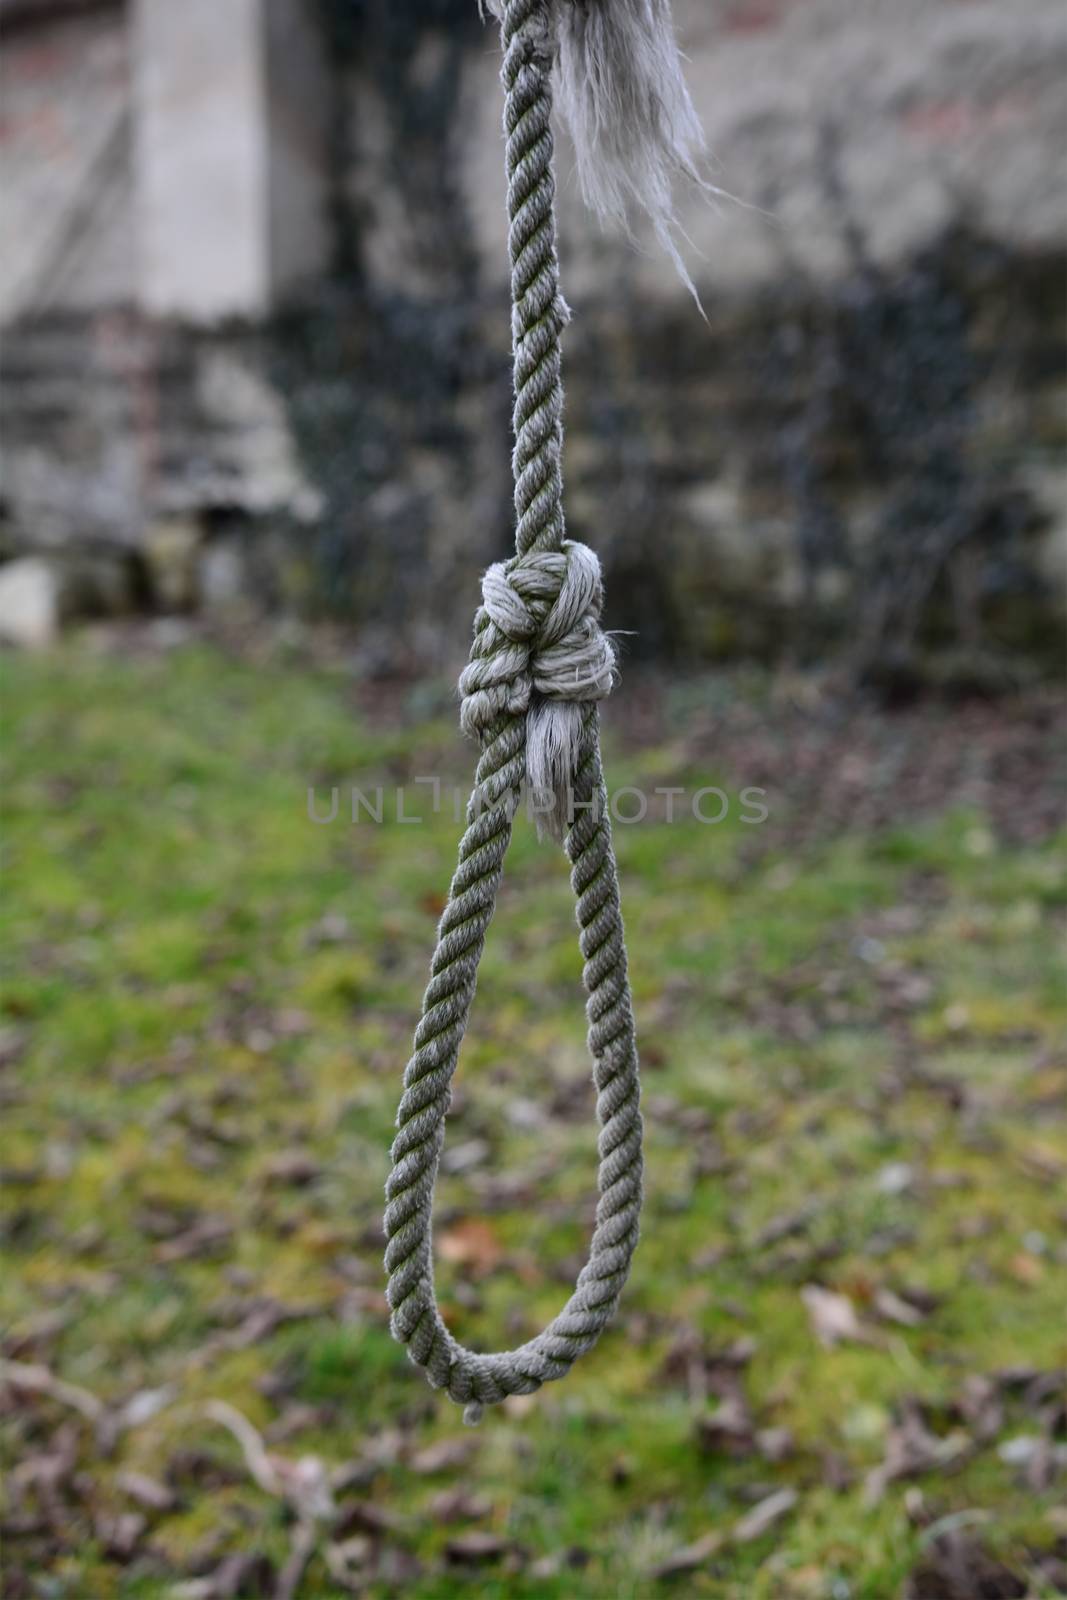 Gallows on a tree in the garden near old wall